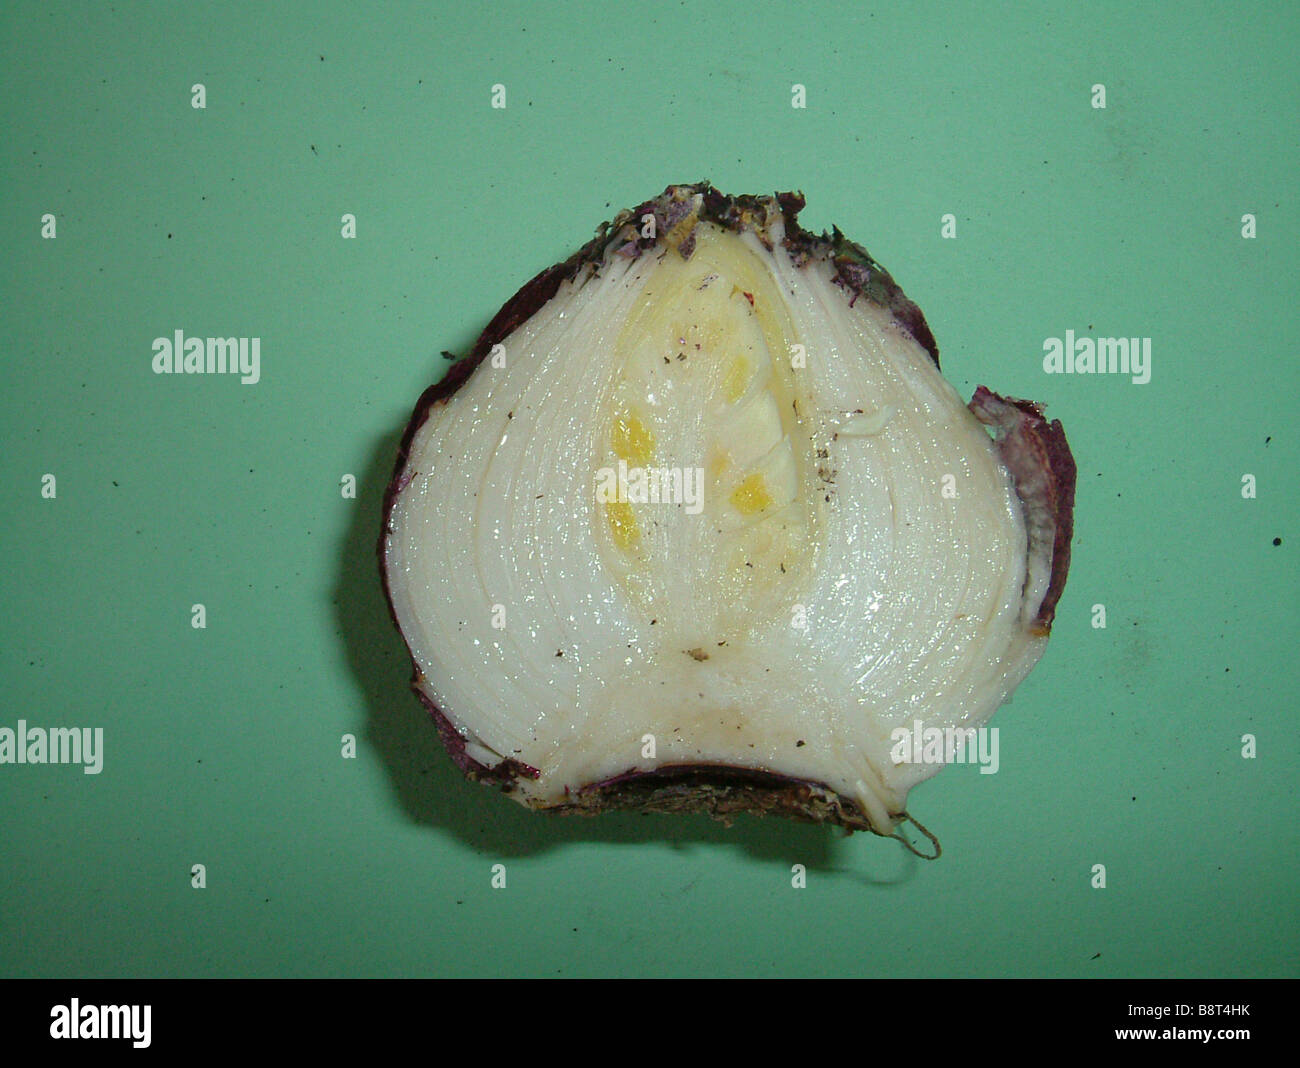 Crossection of a Hyacinth bulb showing embryonic flower Stock Photo